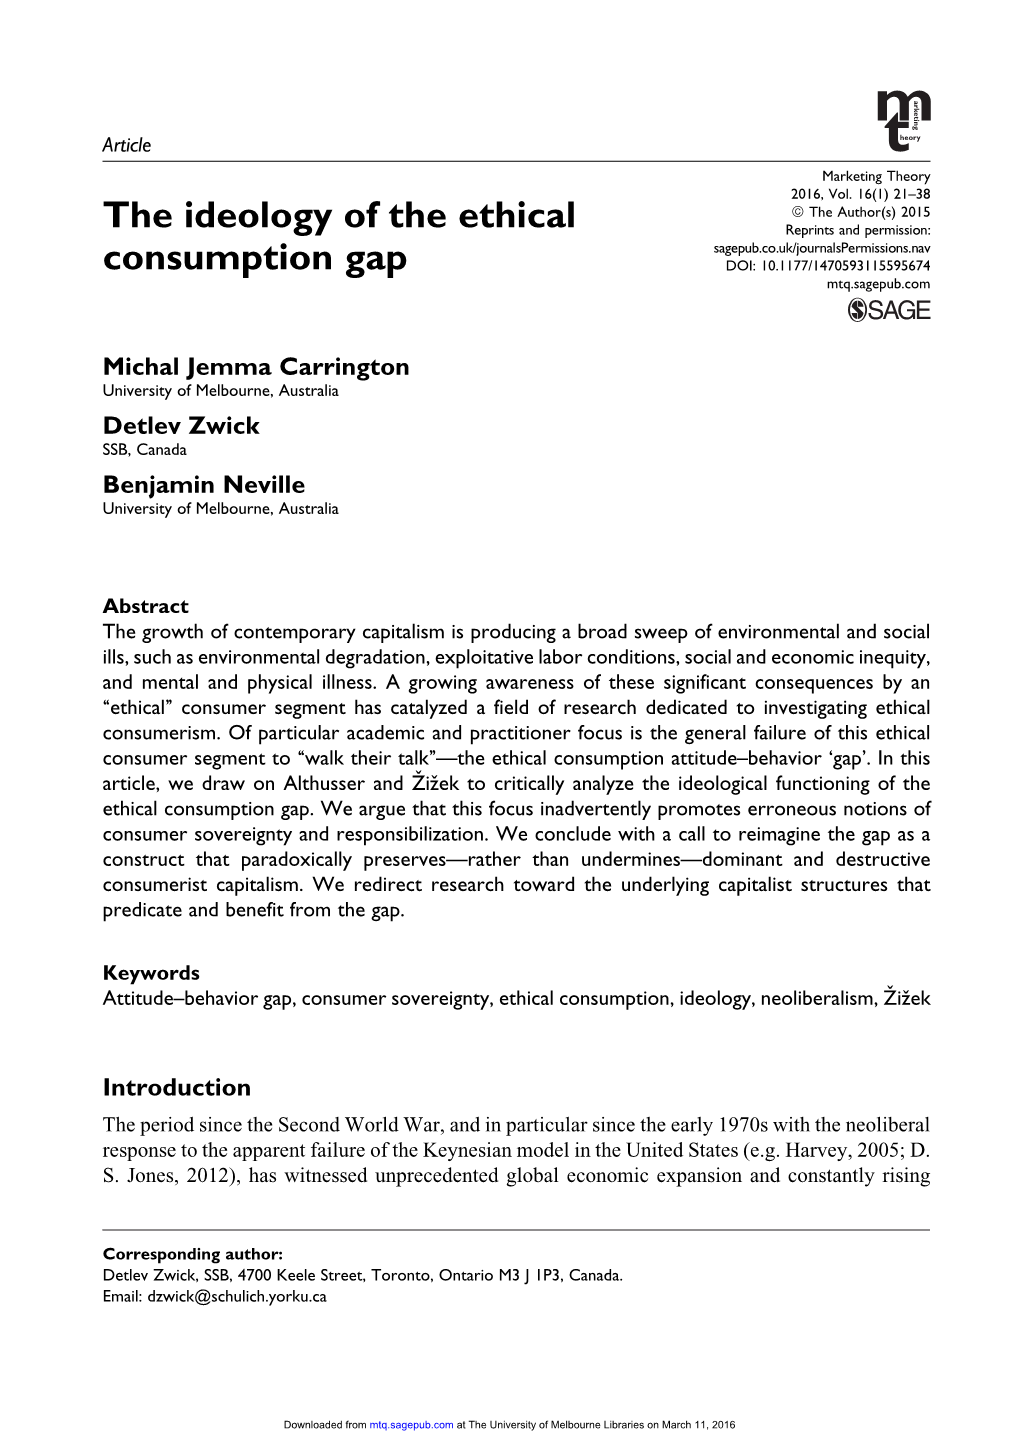 The Ideology of the Ethical Consumption Gap Succeeds When It Presents Itself to the Marketer As Empirical Fact